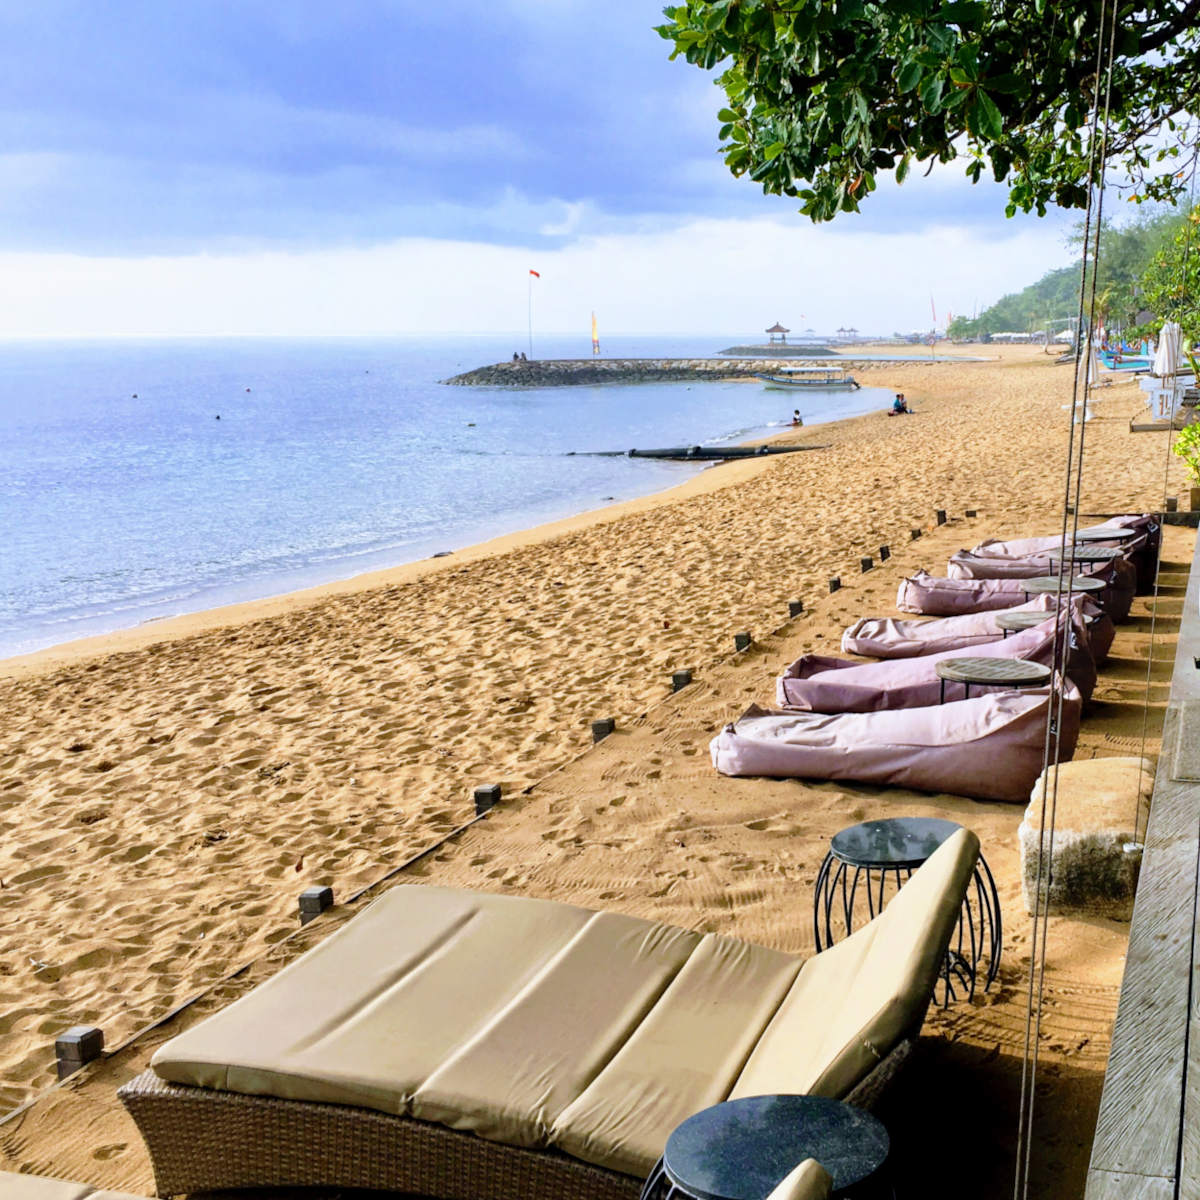 Bean bags and chairs on the beach in Sanur, Bali.